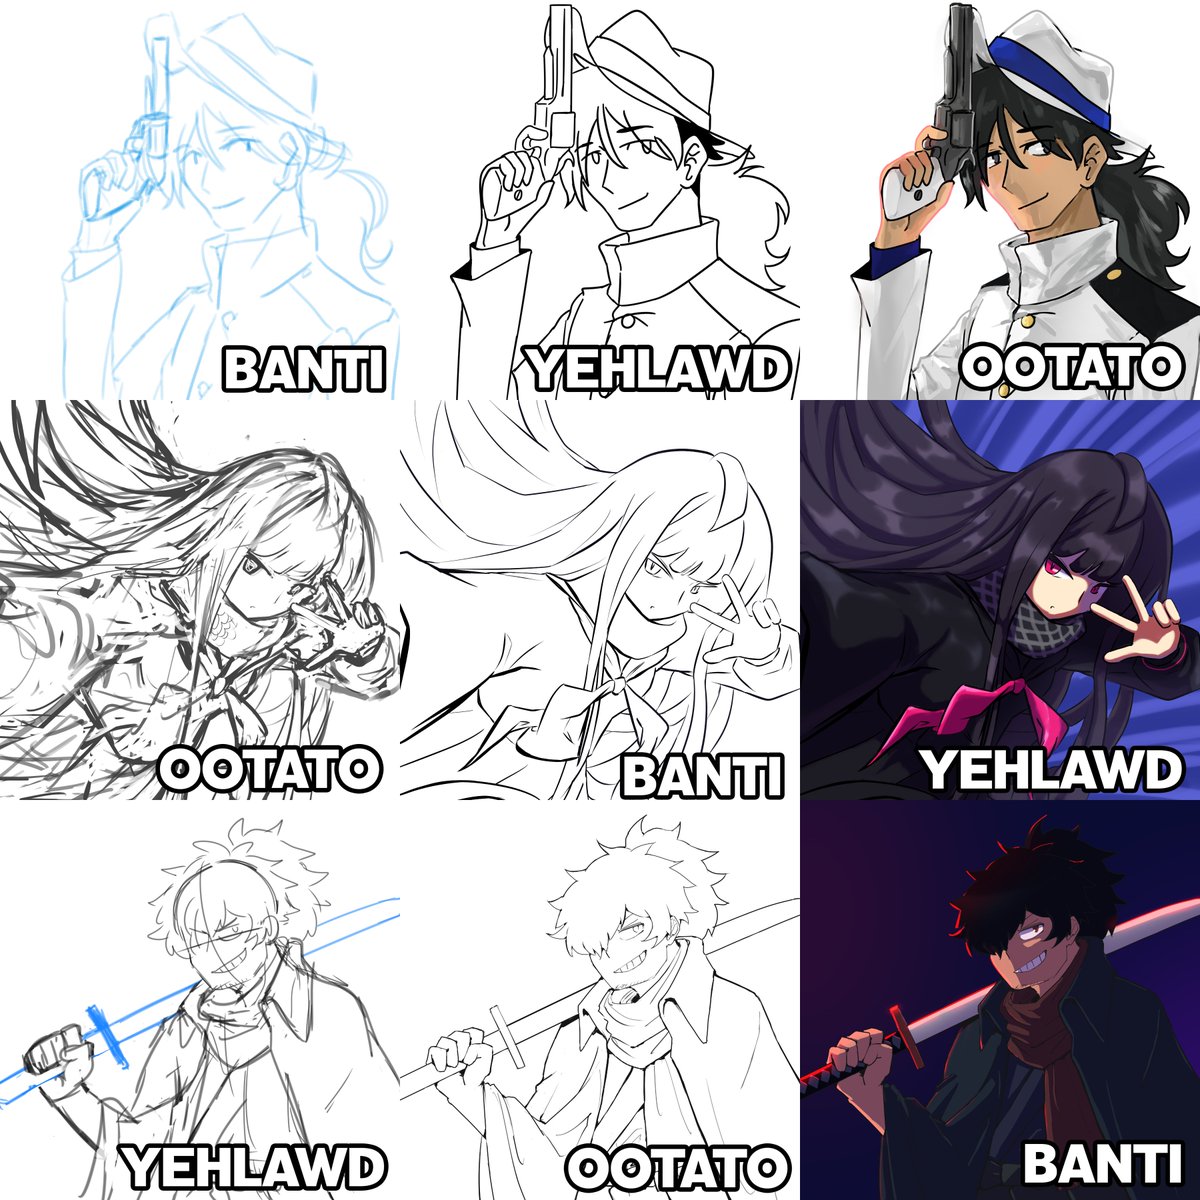 Switcharound meme collab with @ootato470 and @_bantiarna !! I've been wanting to do this for long long time and finally get this chance to have fun with it! #FGO #FateGO 